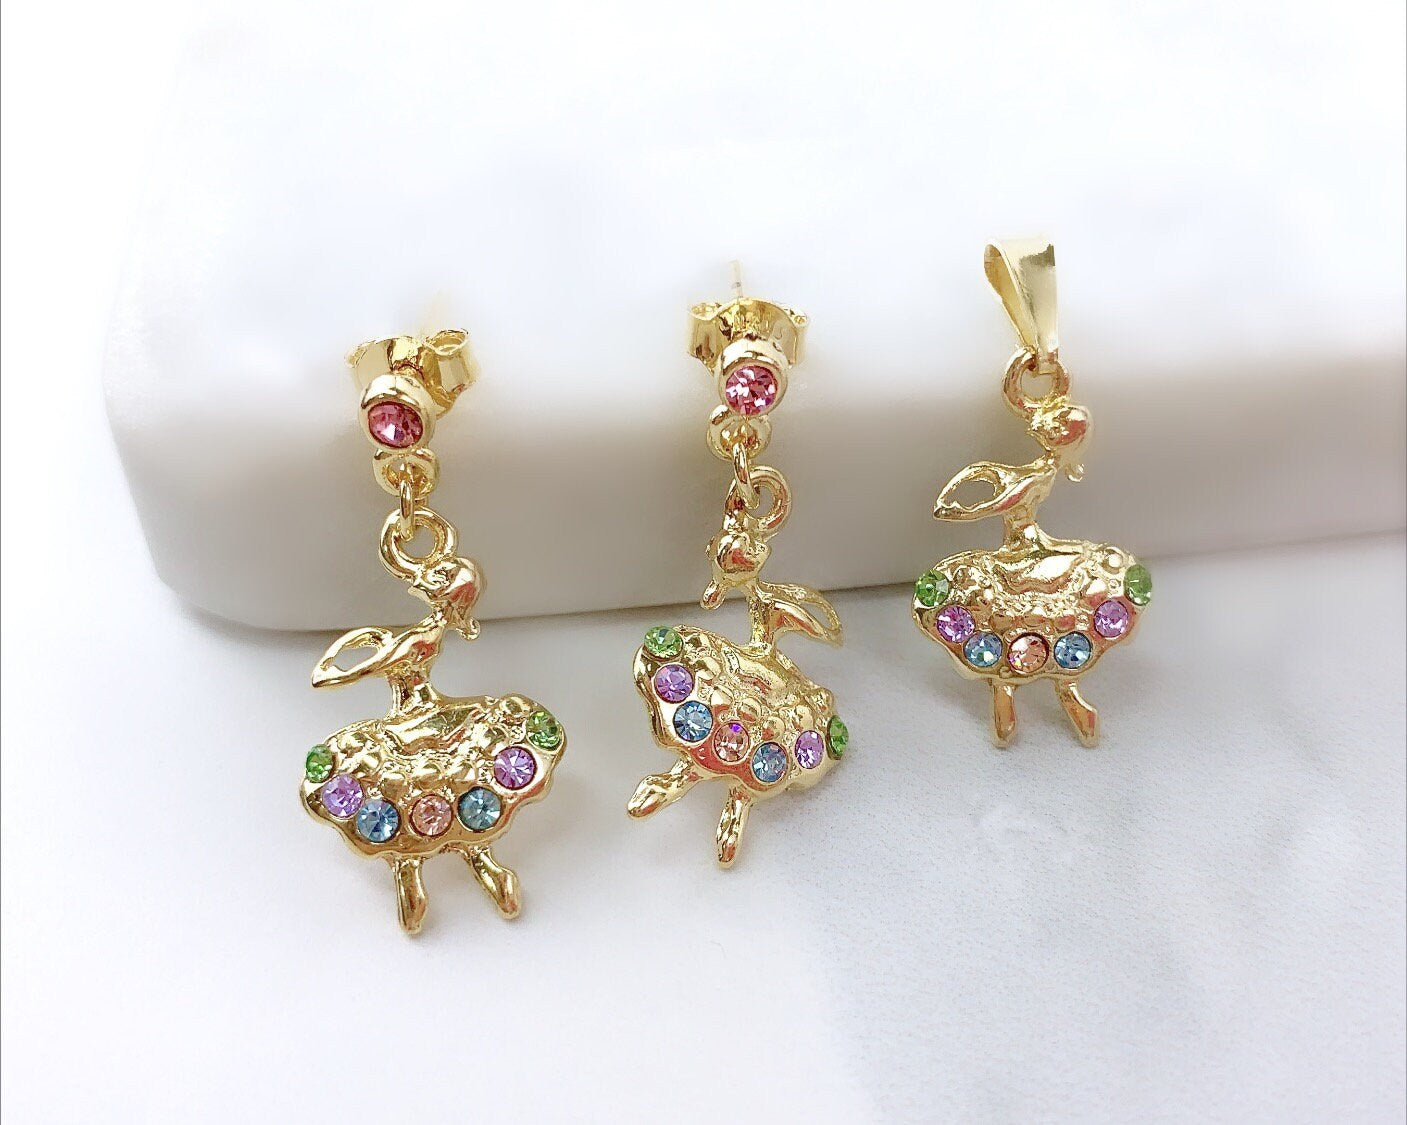 18k Gold Filled with Colored Cubic Zirconia Ballet Dancer Earrings and Pendant Wholesale Jewelry Supplies